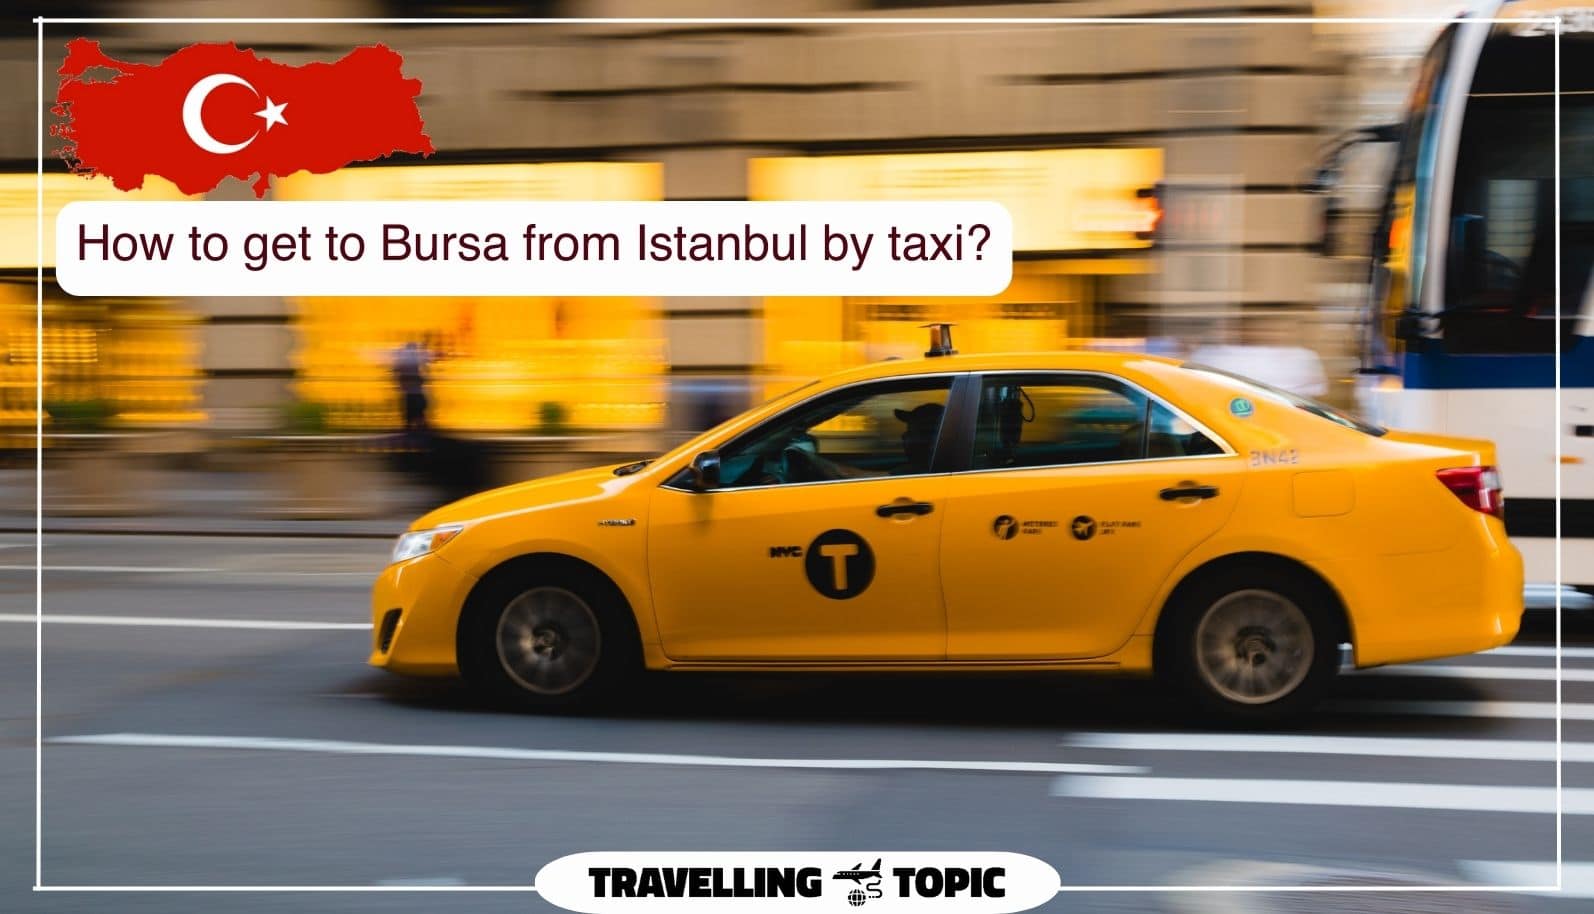 How to get to Bursa from Istanbul by taxi